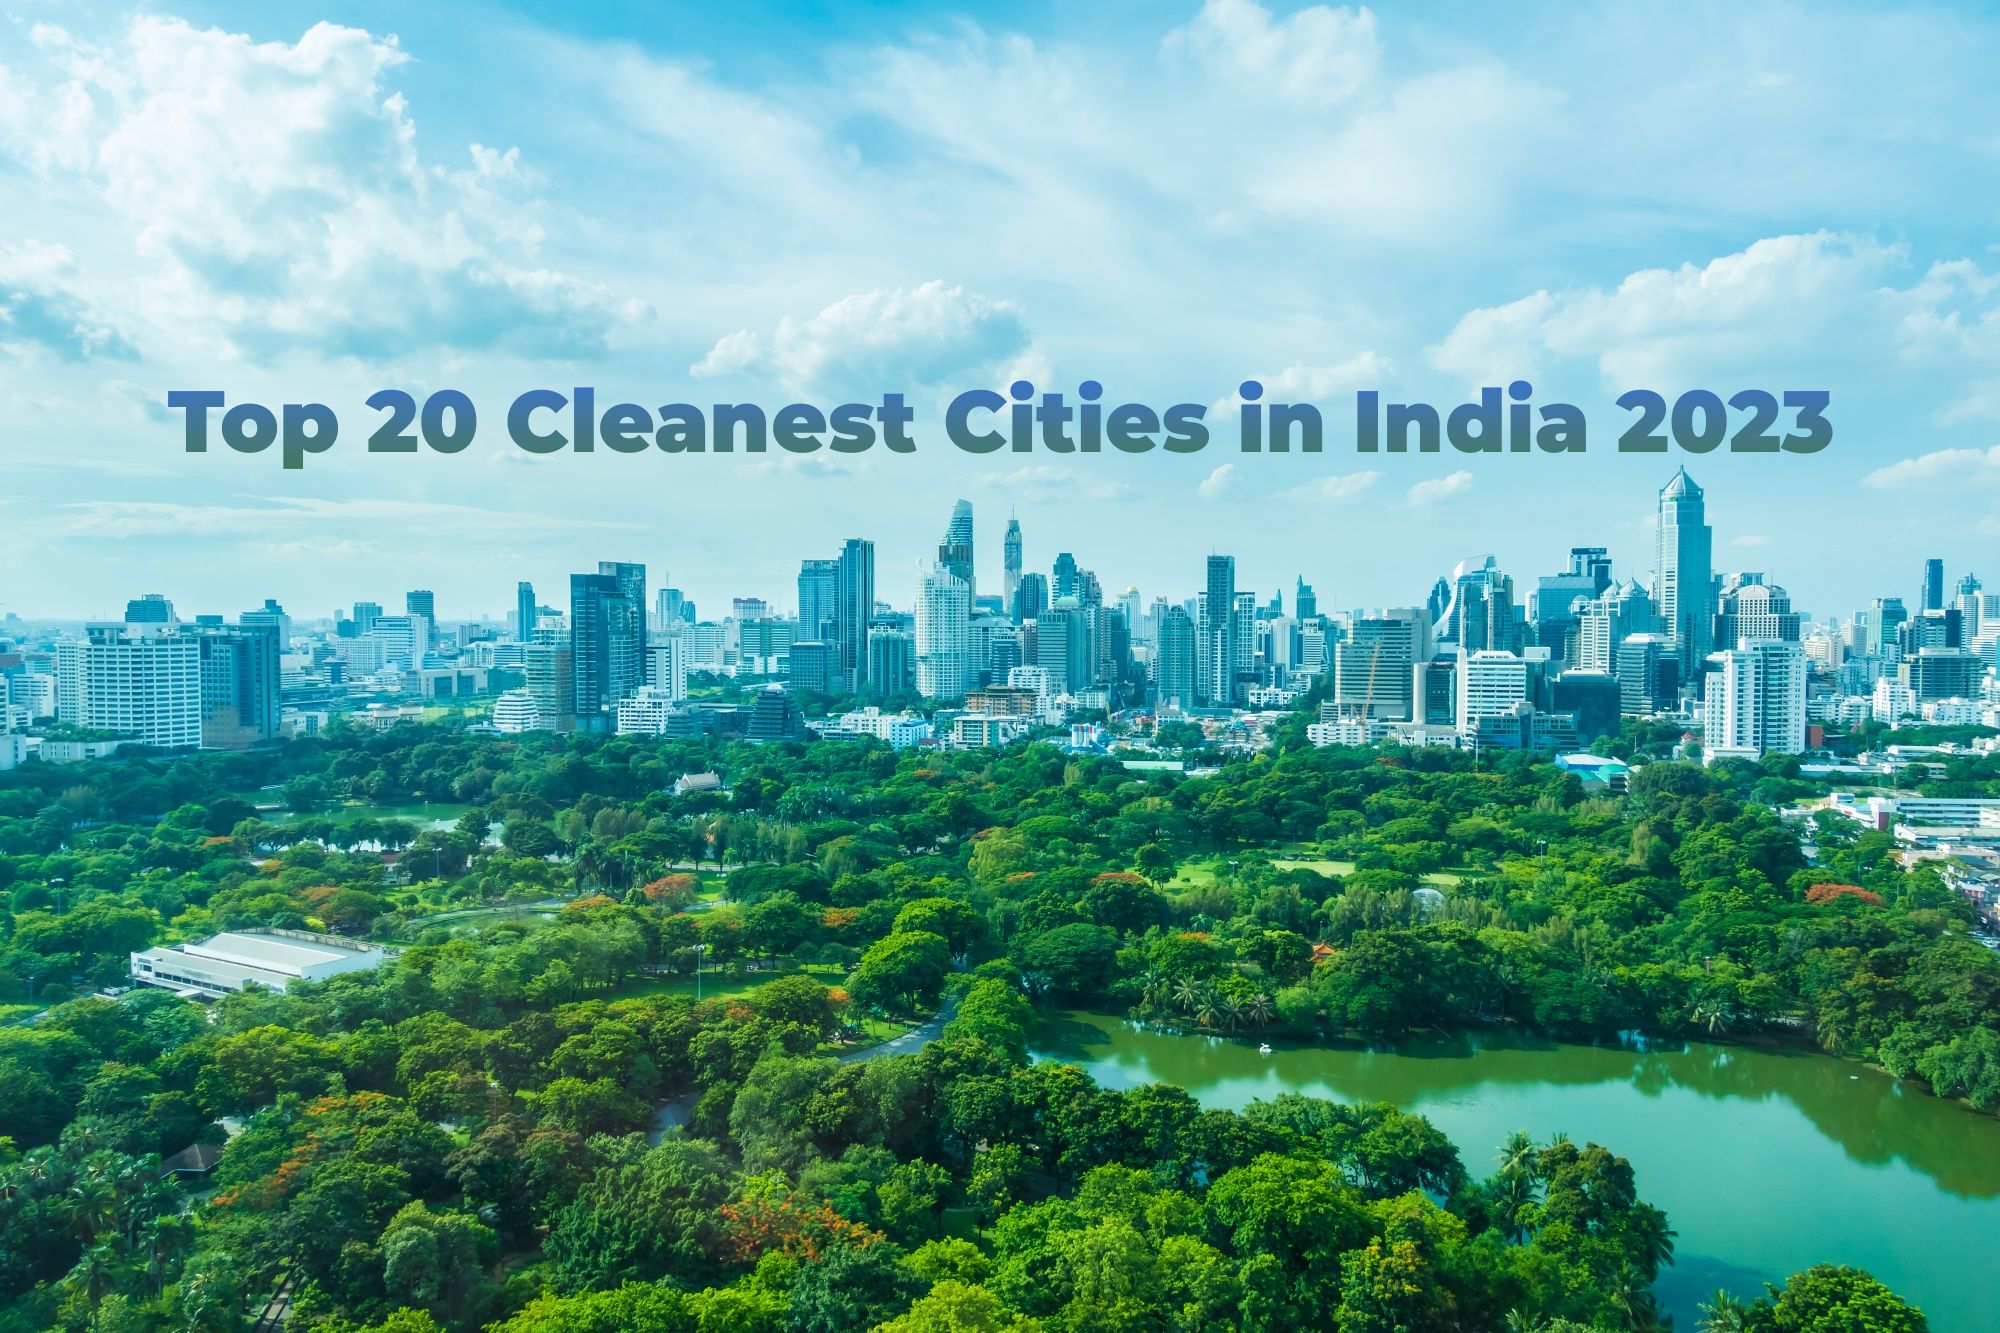 top-20-cleanest-cities-in-india-2023-travellersofindia.com